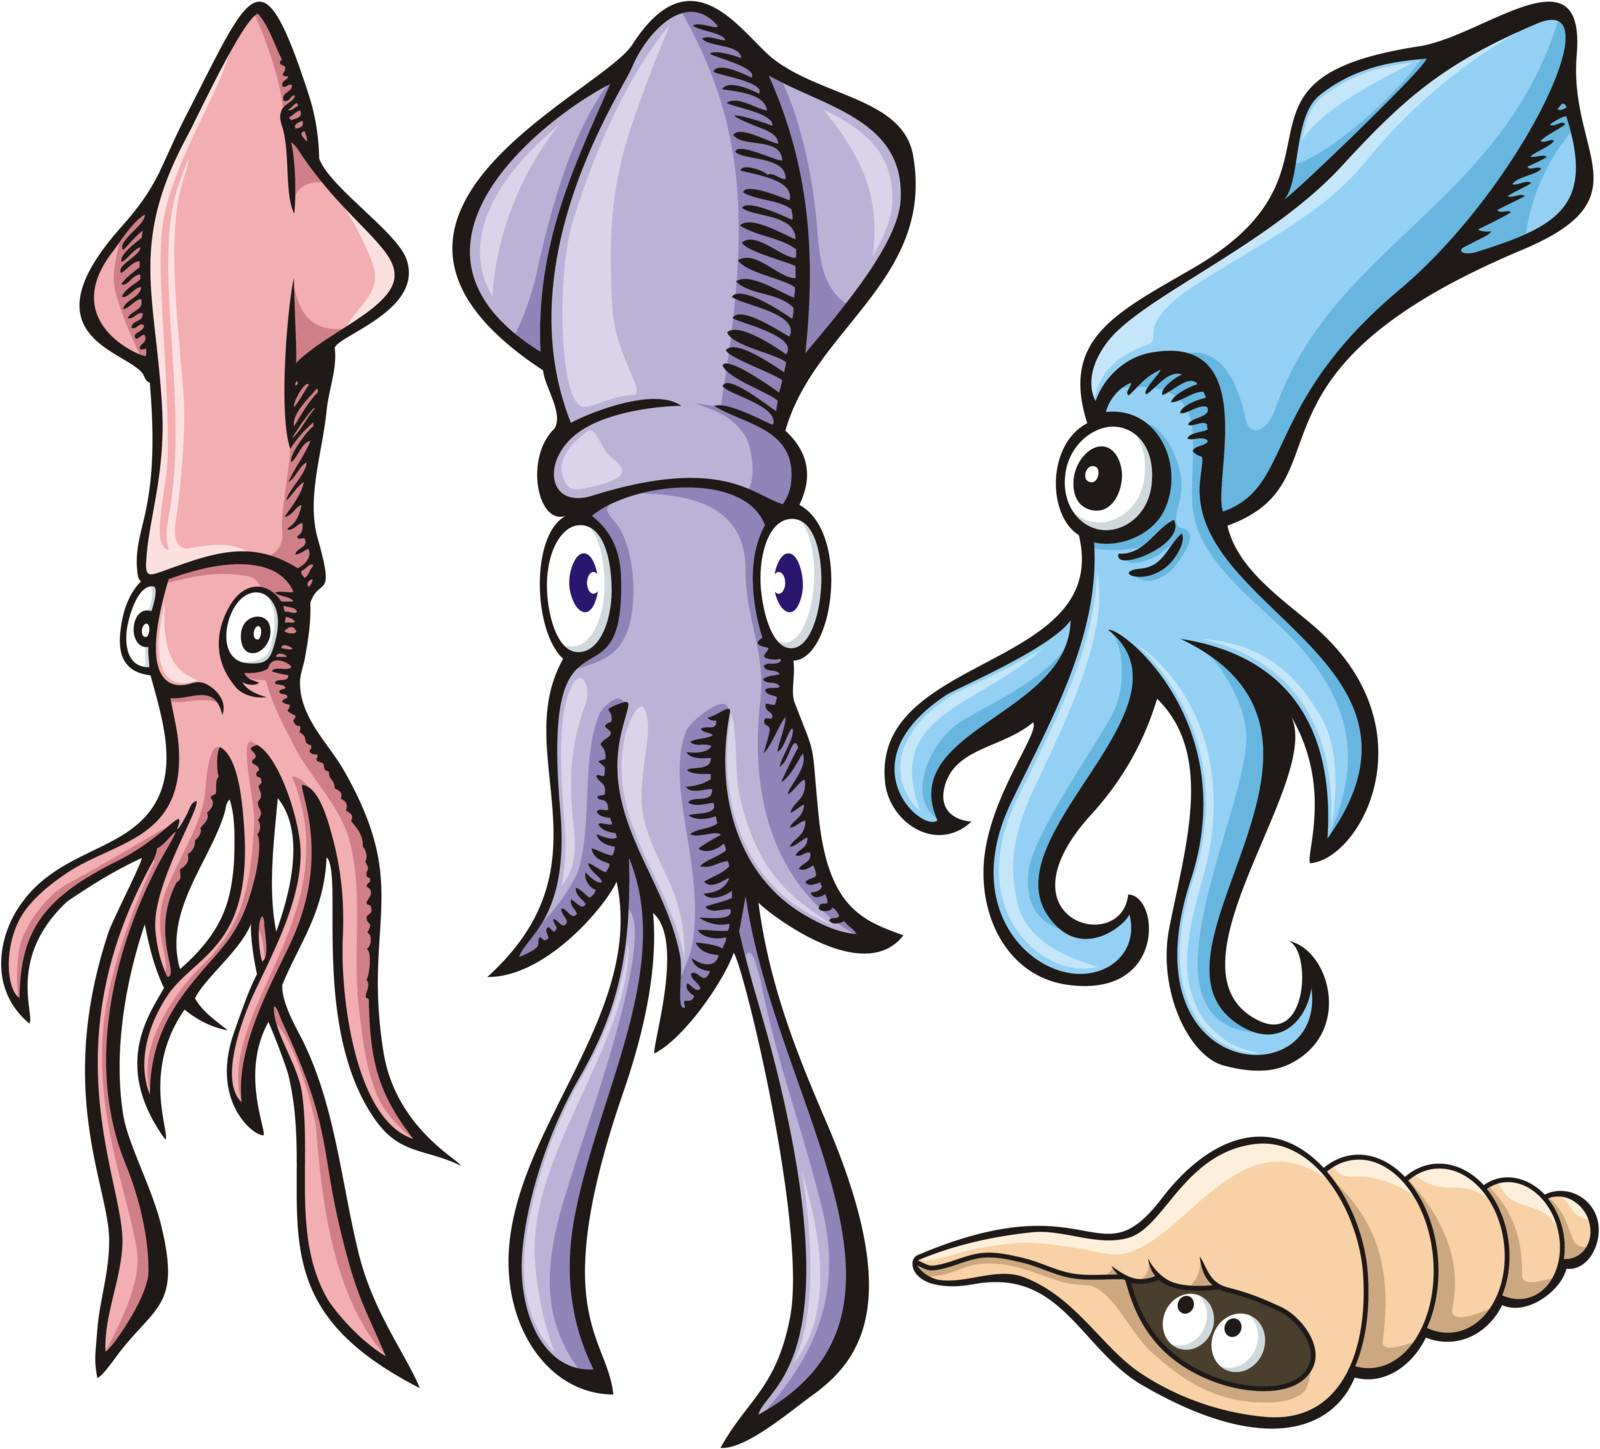 Three cute squid cartoons and a sea shell isolated on white.